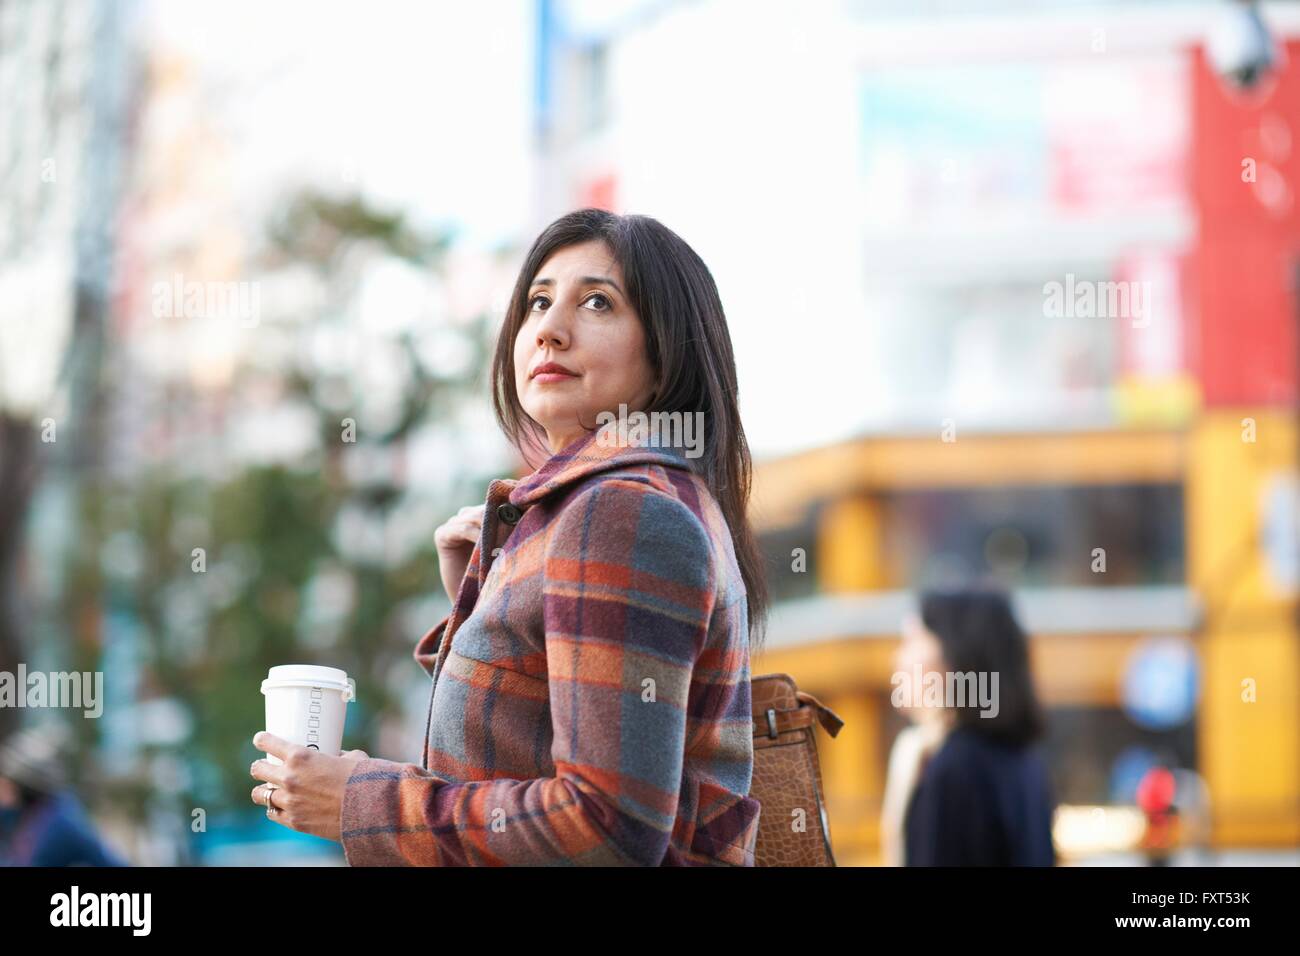 Mature female tourist with takeaway coffee on city street, Tokyo, Japan Stock Photo